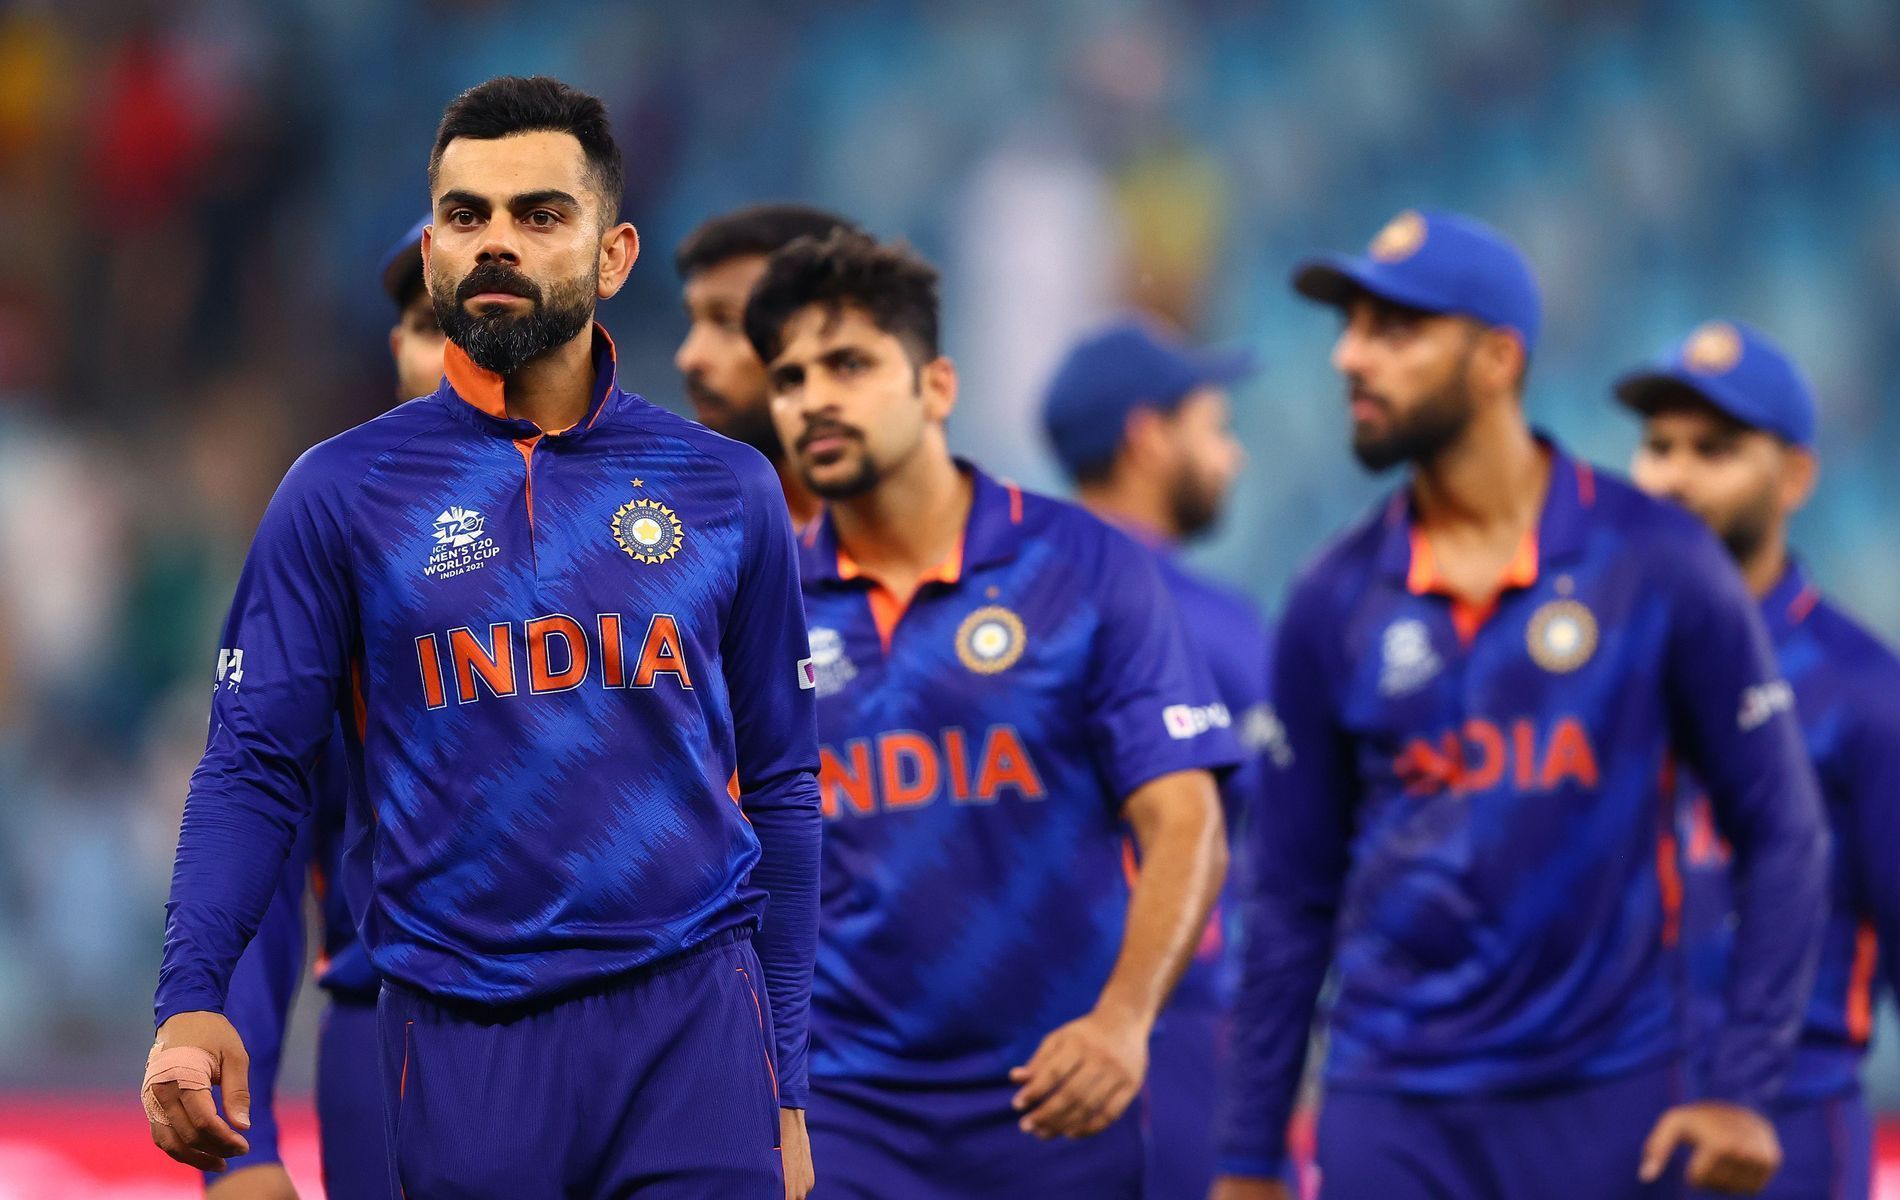 India slumped to their second consecutive defeat in the T20 World Cup against New Zealand.